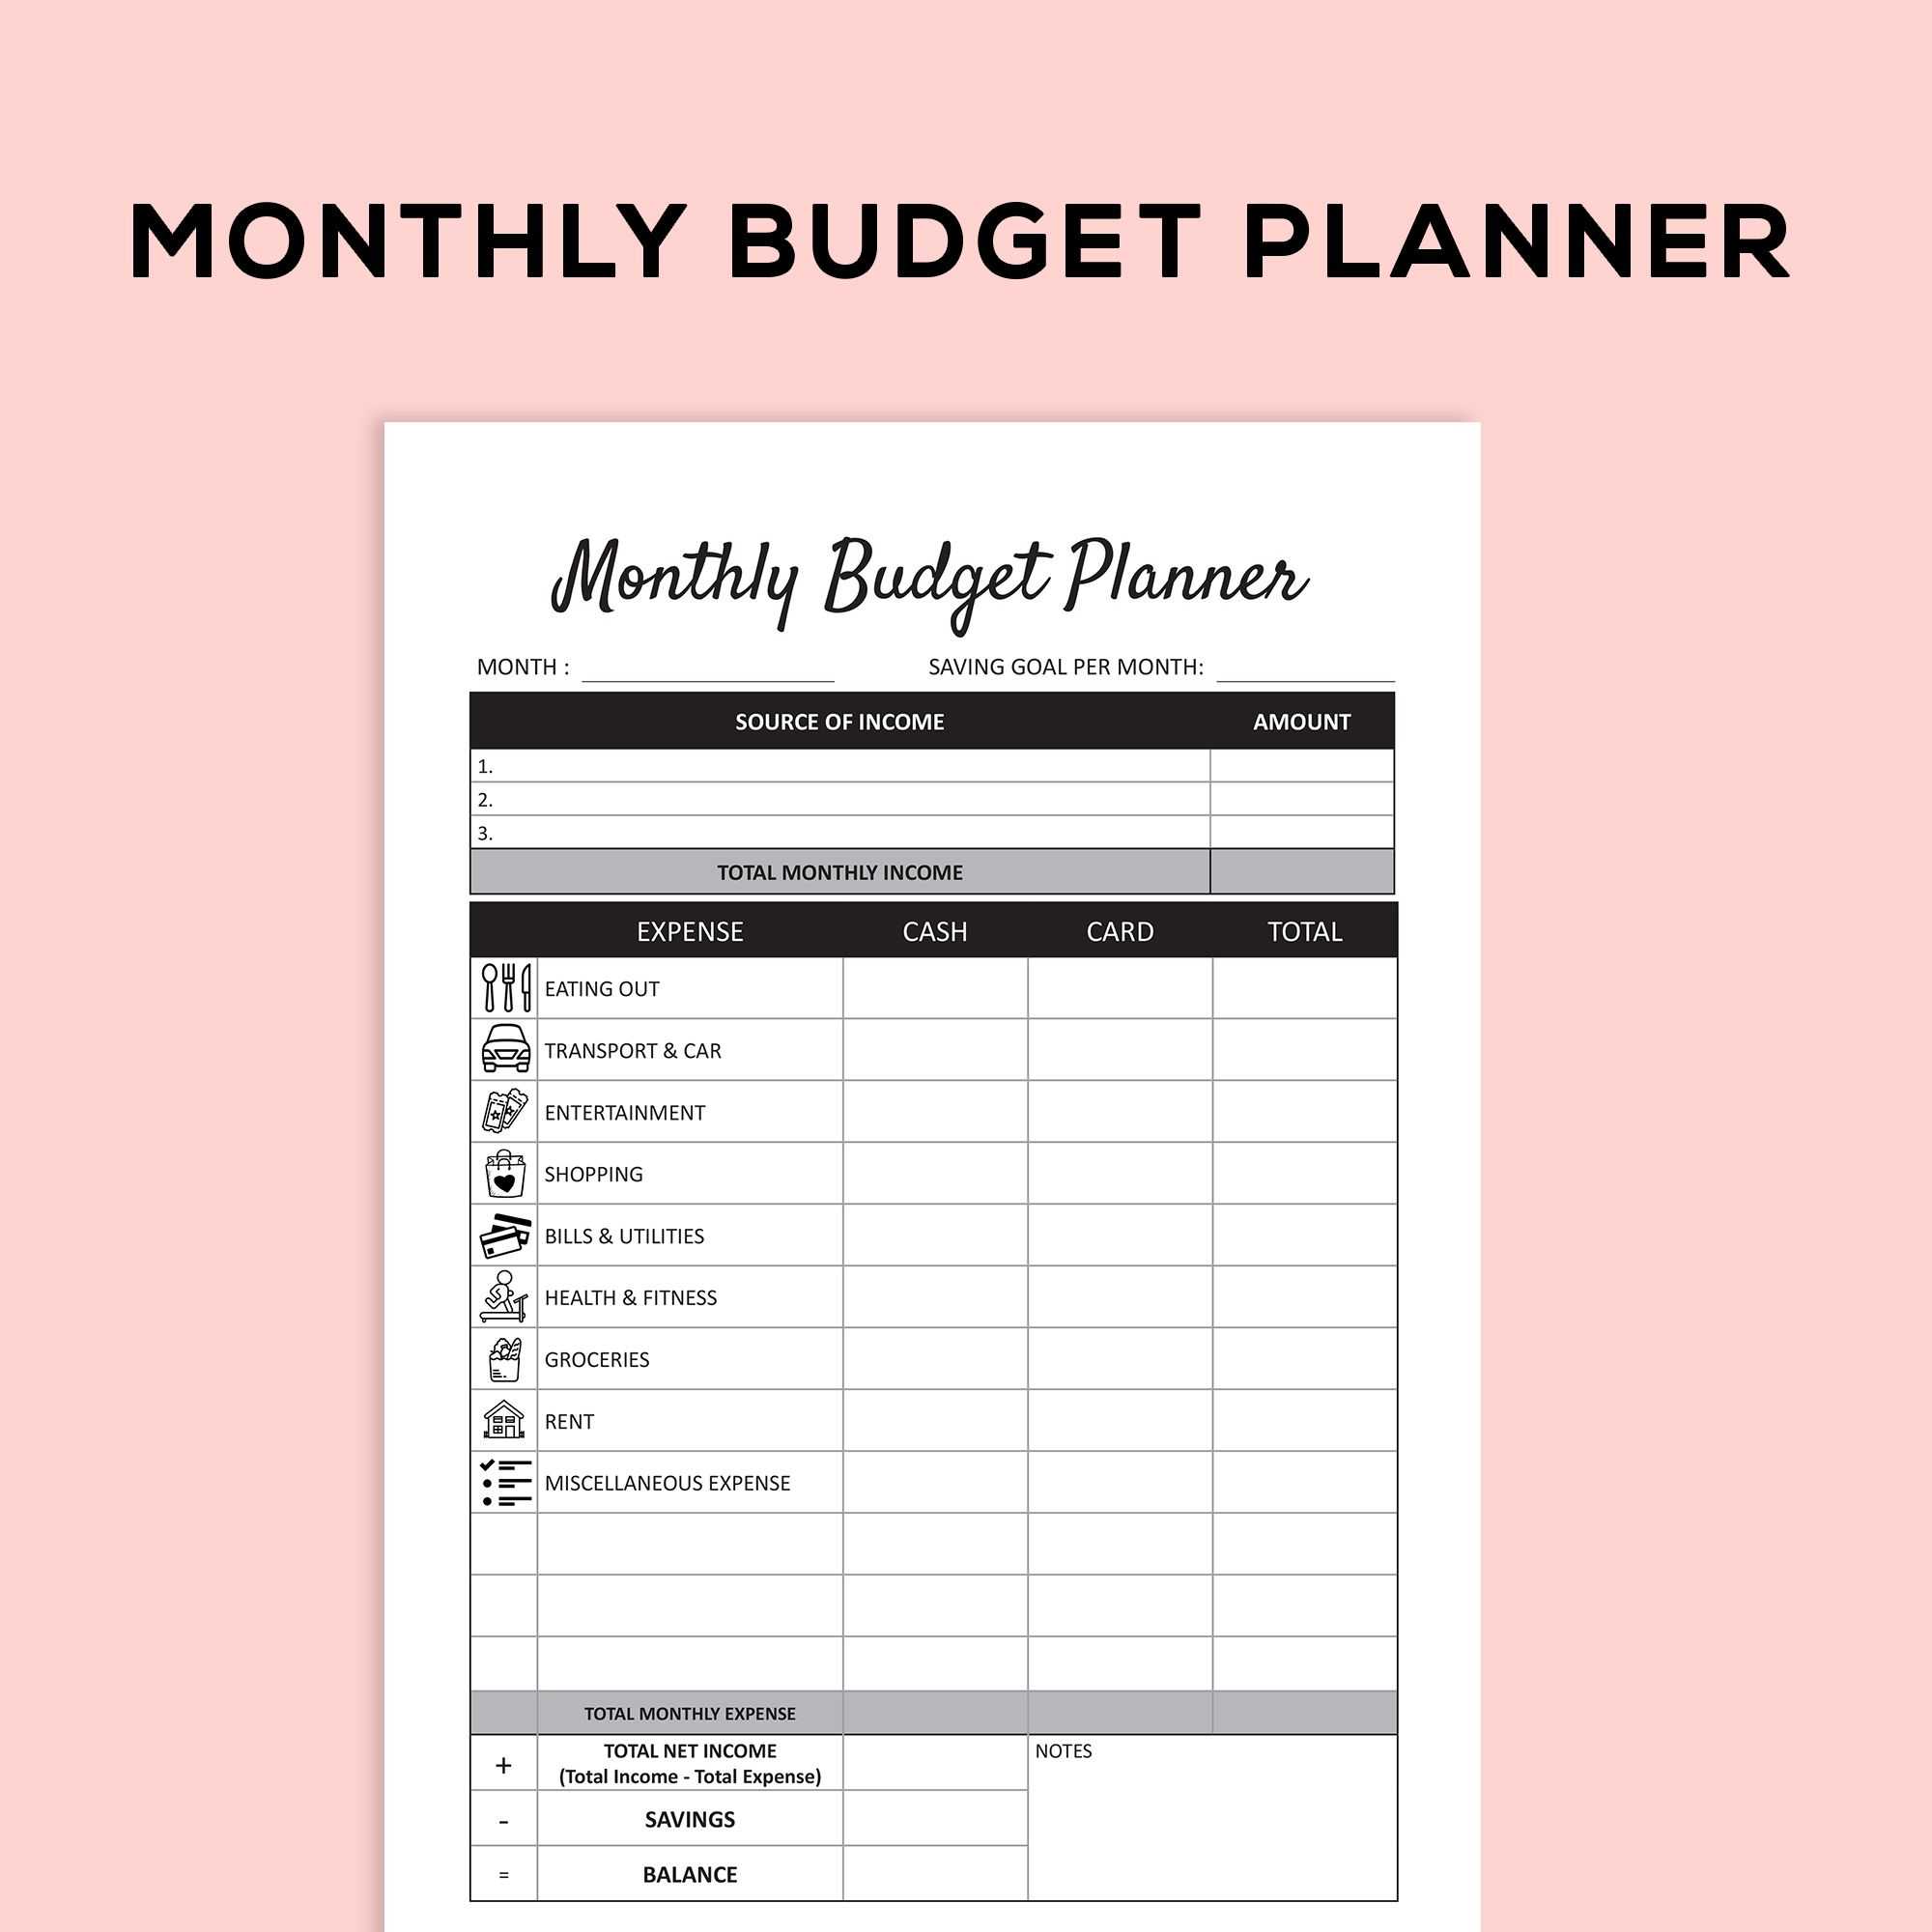 Monthly Budget Worksheet Pdf together with Monthly Bud Planner Monthly Bud Planner I Made anderson